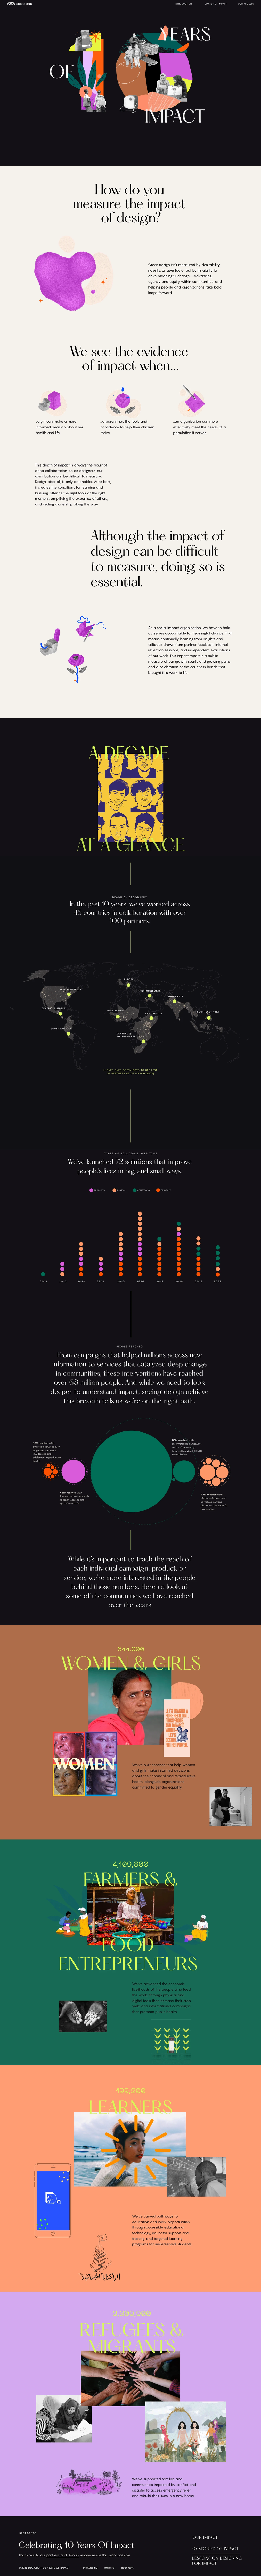 Ten Year Impact Landing Page Example: IDEO.org's Ten Year Impact Report